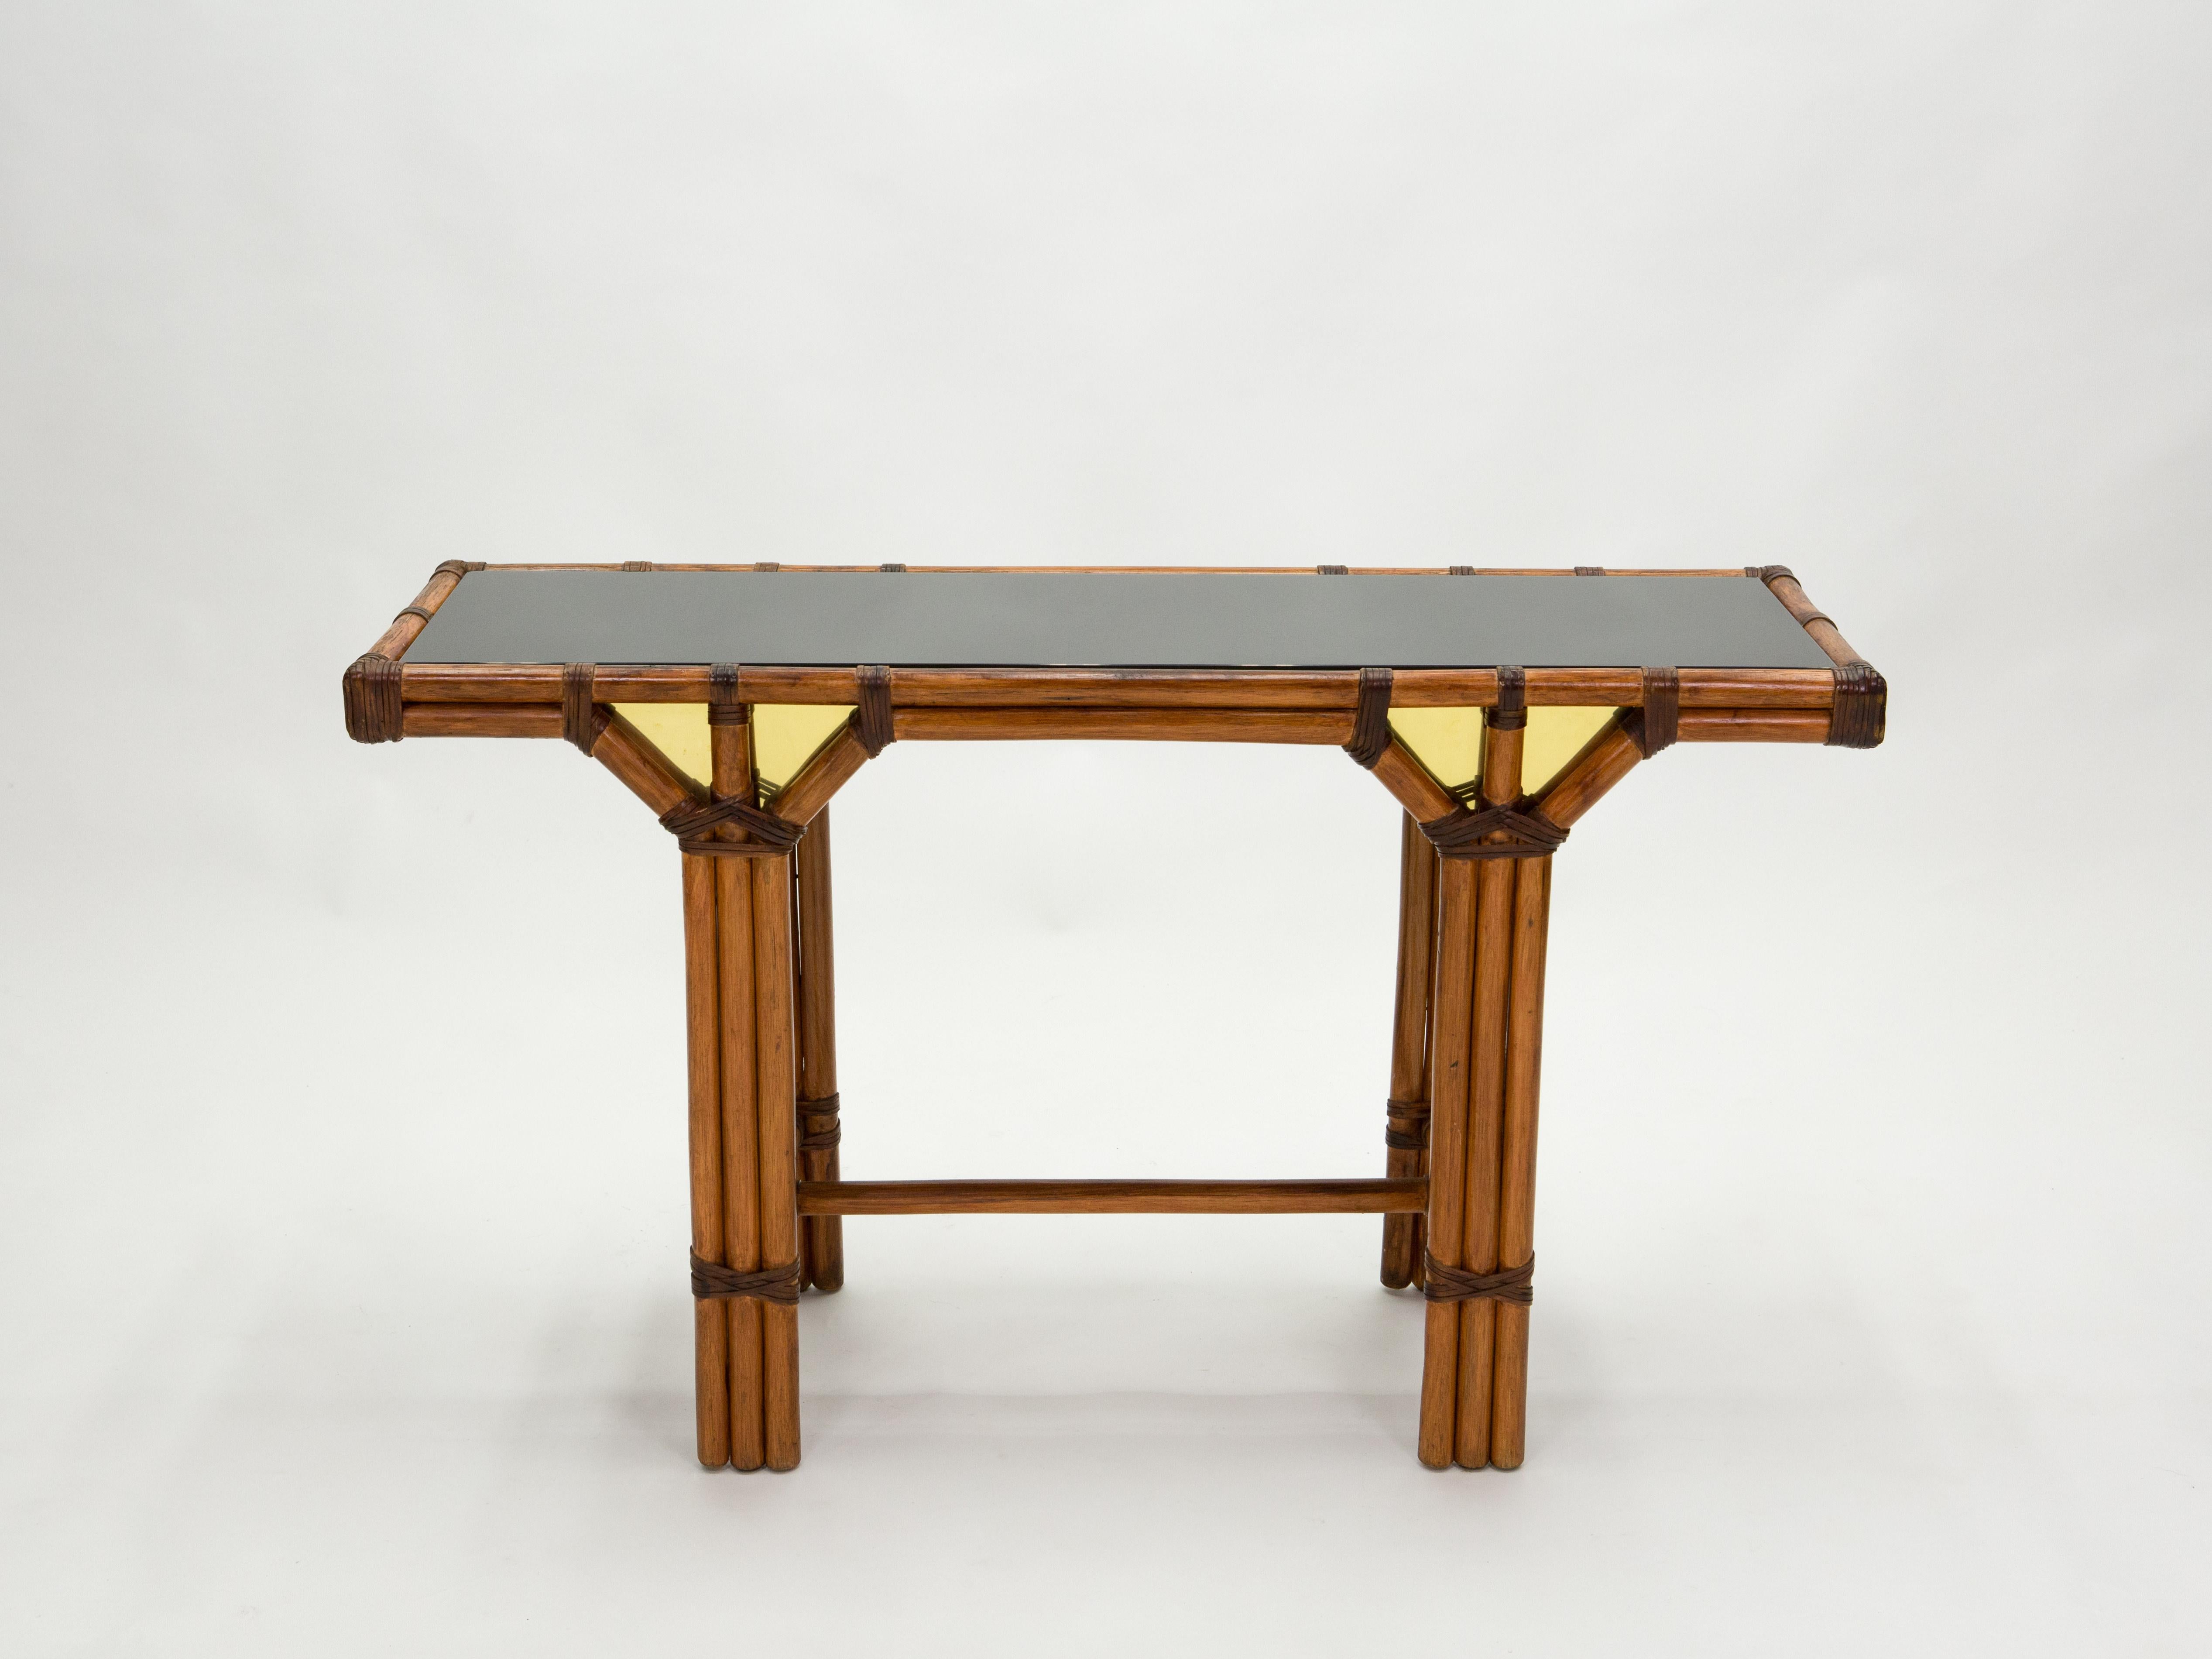 This beautiful console table was made from natural bamboo, with leather joints and luxe displays of brass inserts on the front and back, in the early 1970s in France. It features a slick black Opaline glass top. The piece was designed from the